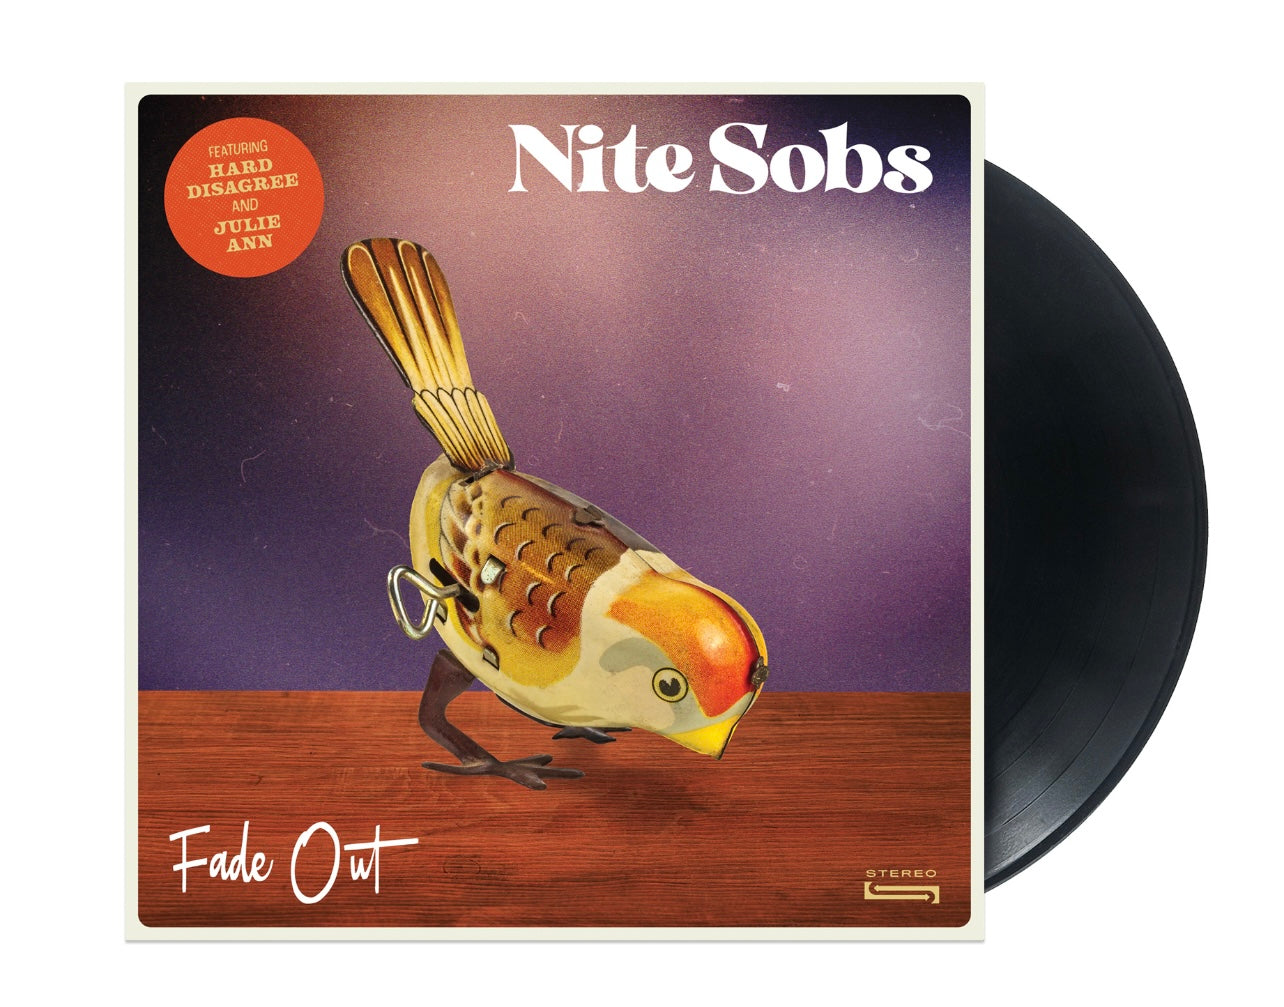 OMR-101 Nite Sobs “Fade Out” LP